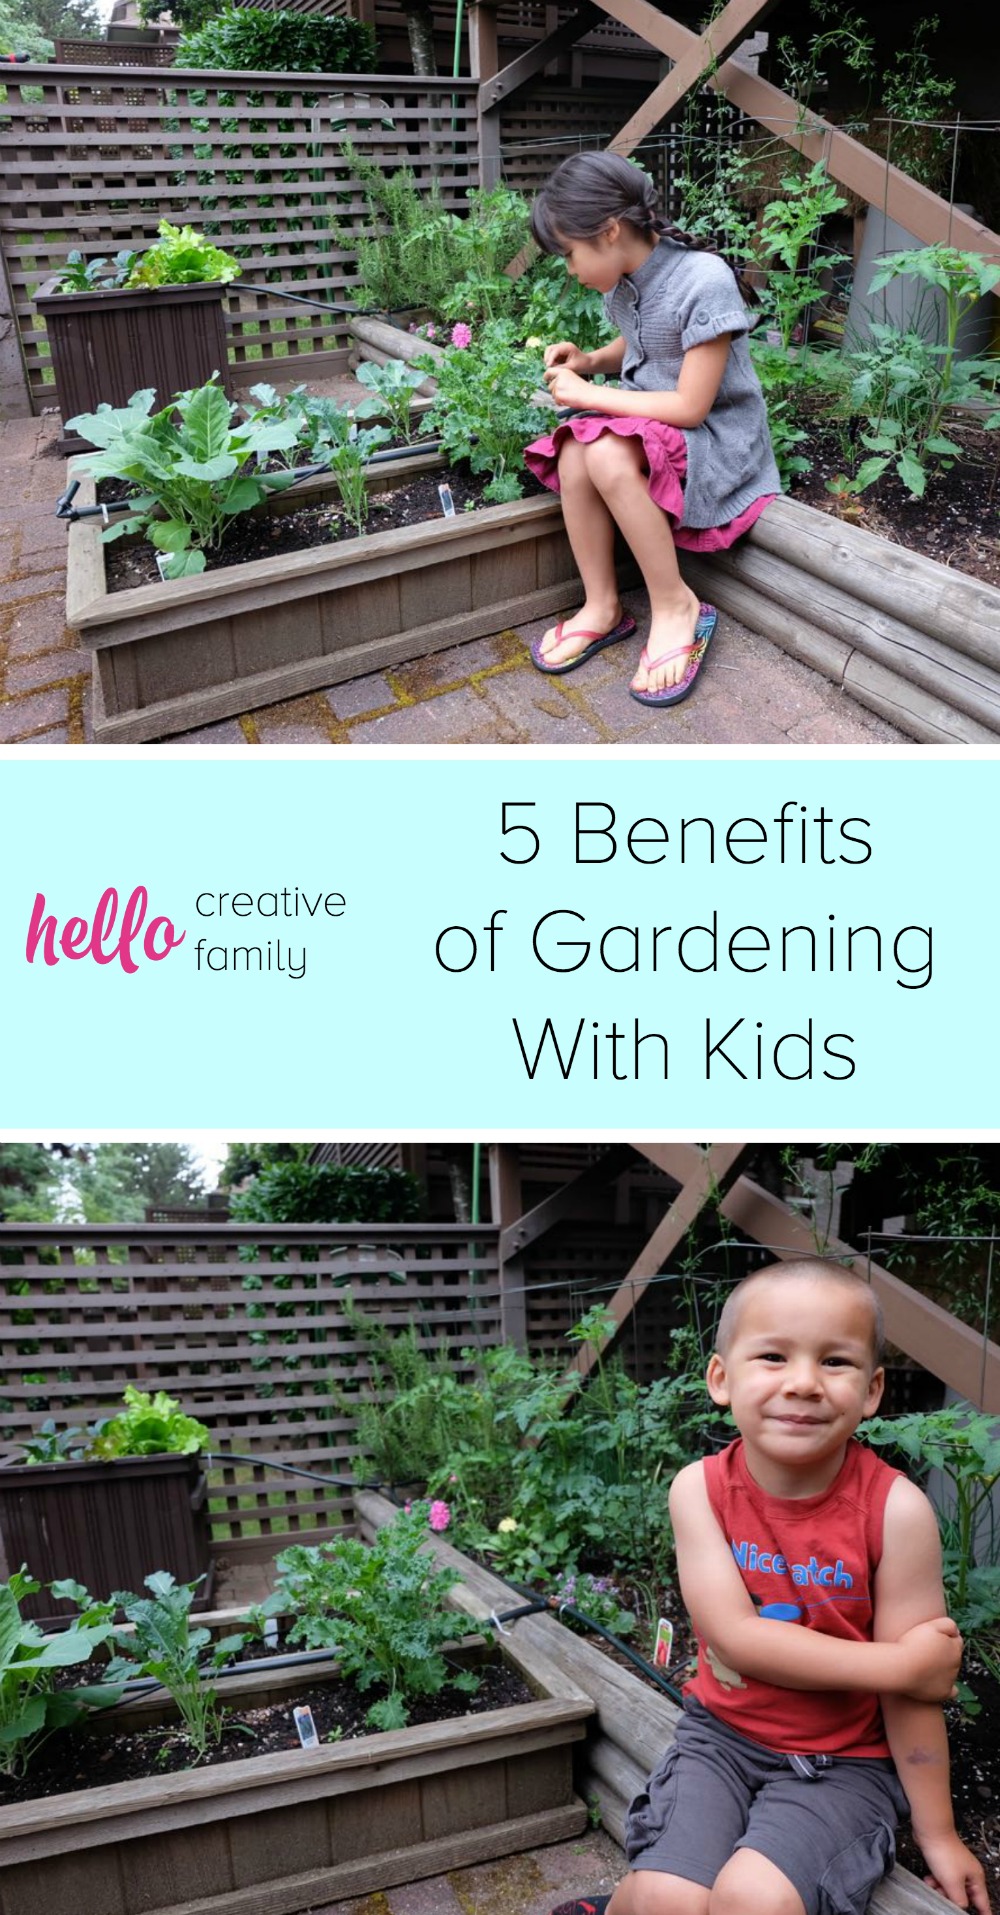 Want to start gardening with your kids? There are so many good reasons why gardening is great for a child's development! Here are 5 of our favorites!